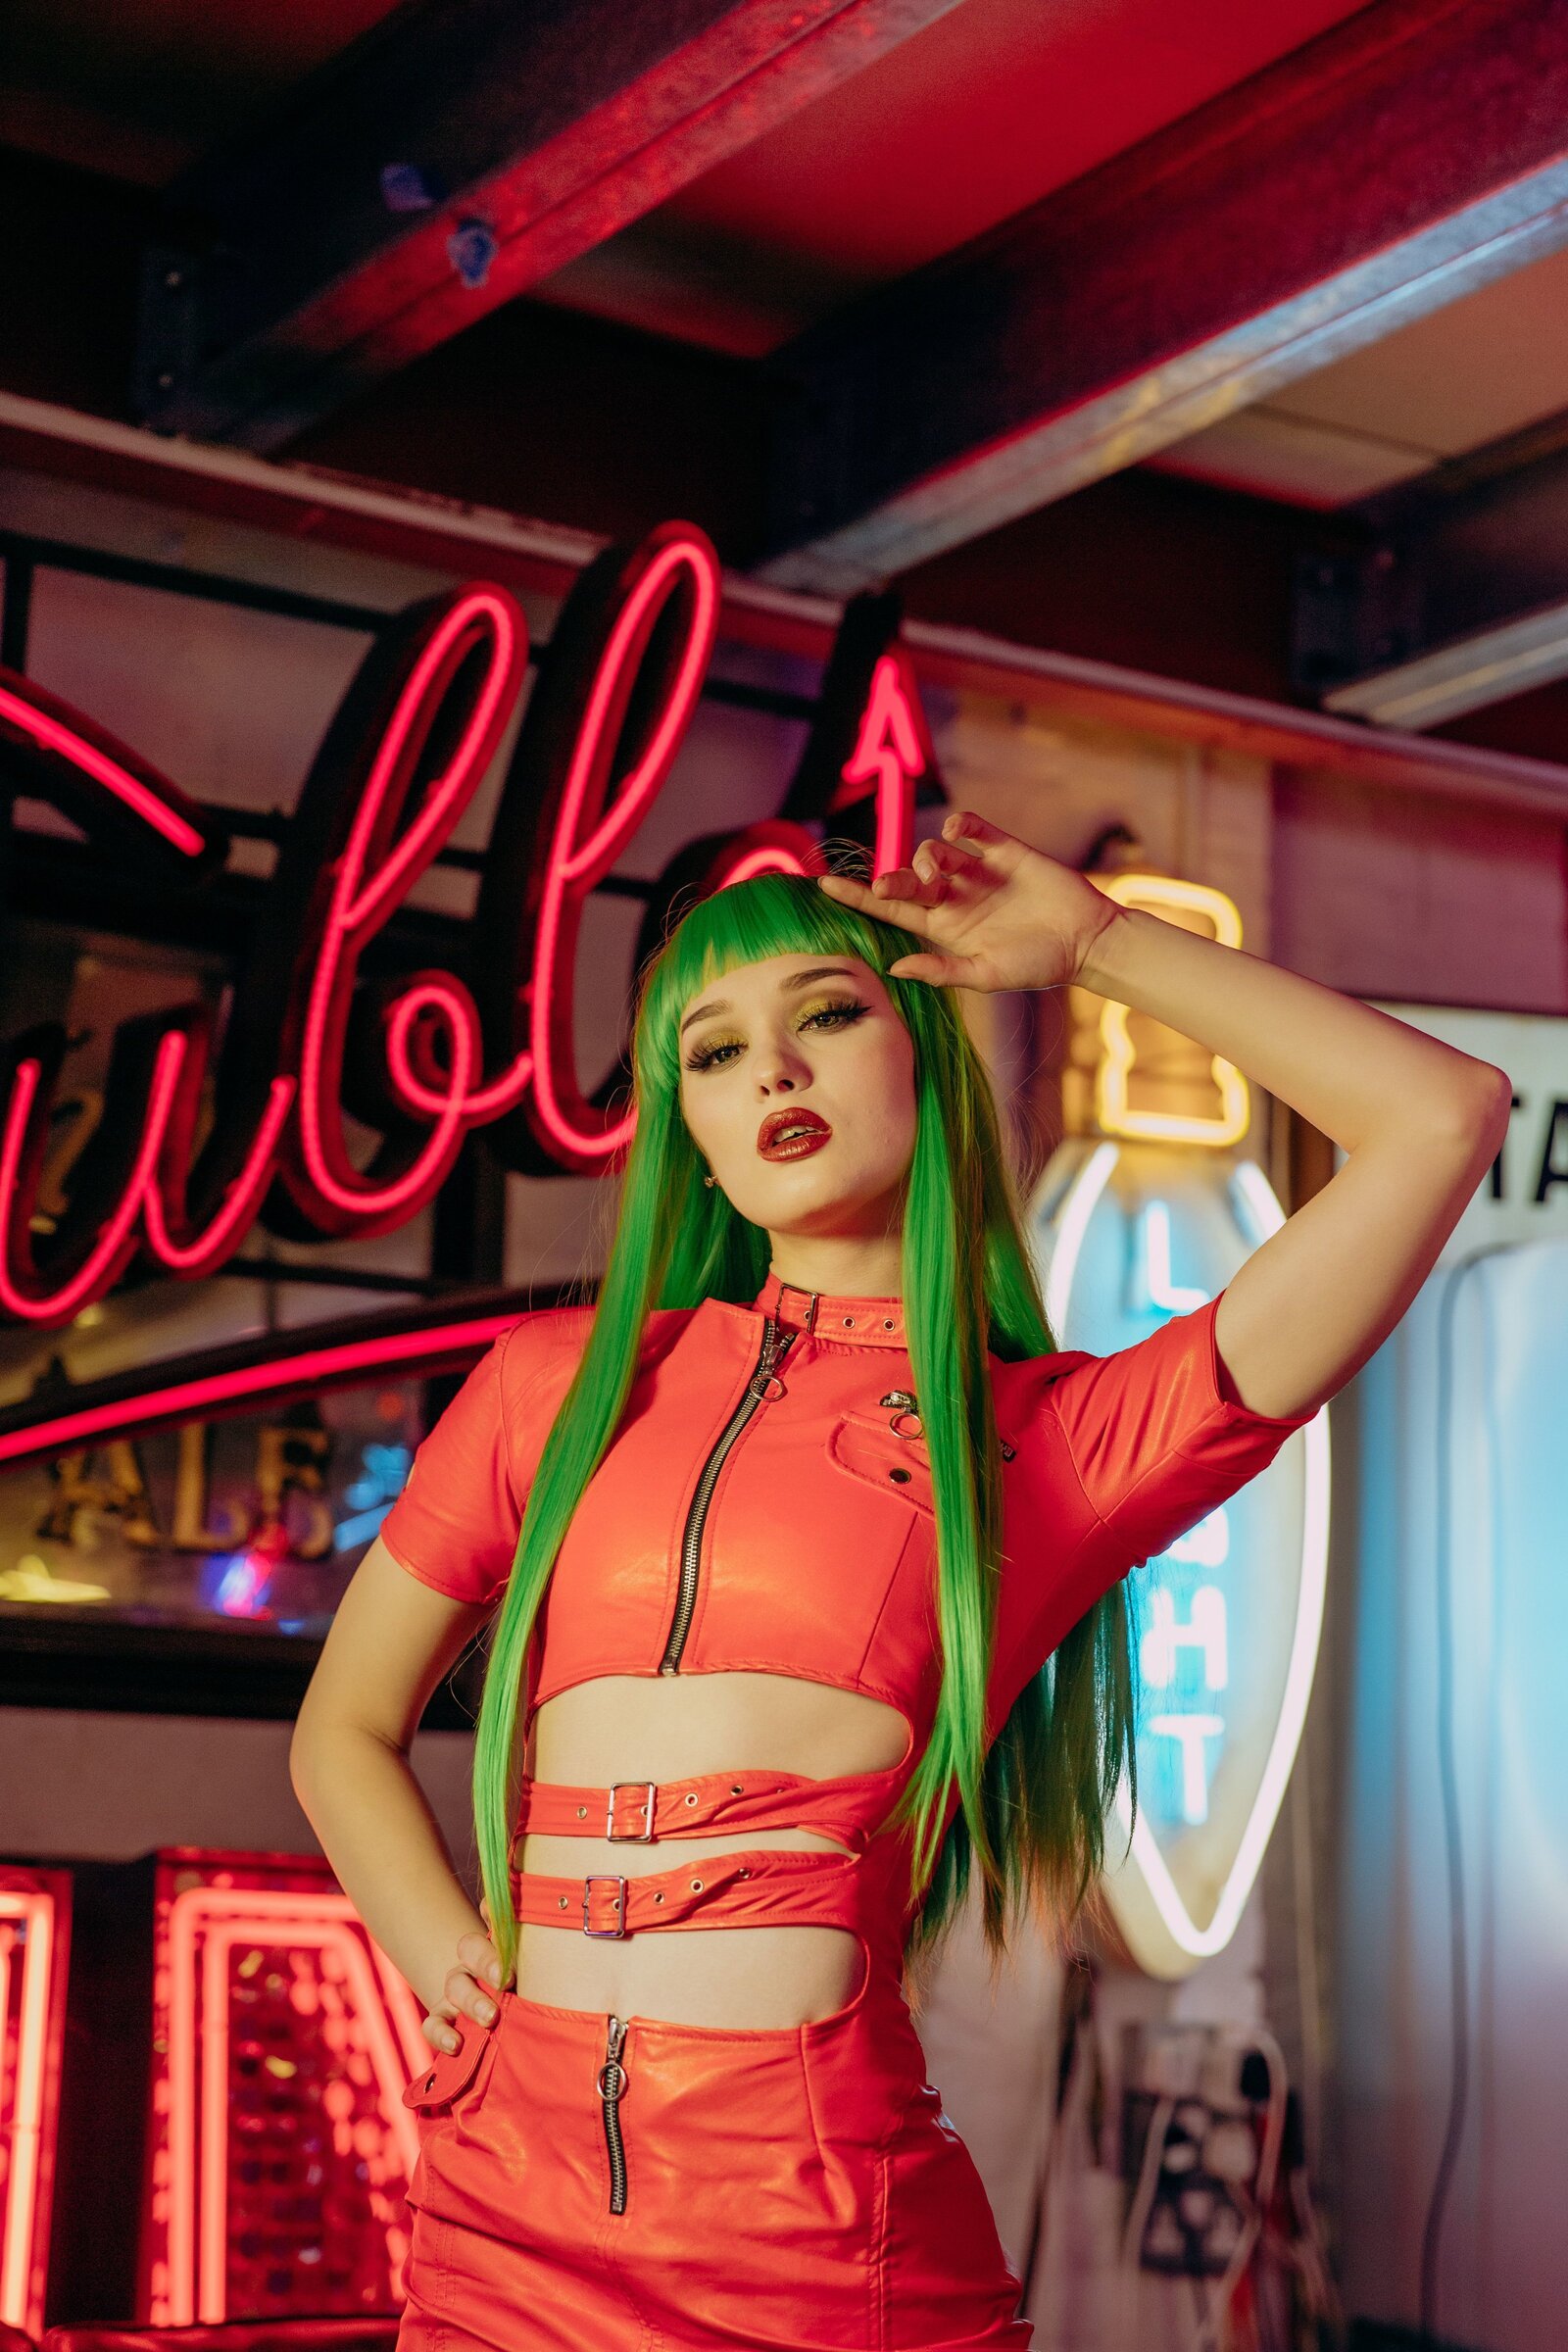 Saida wearing a red leather dress with thigh high boots and a neon green wig, infront of a neon sign saying "trouble"